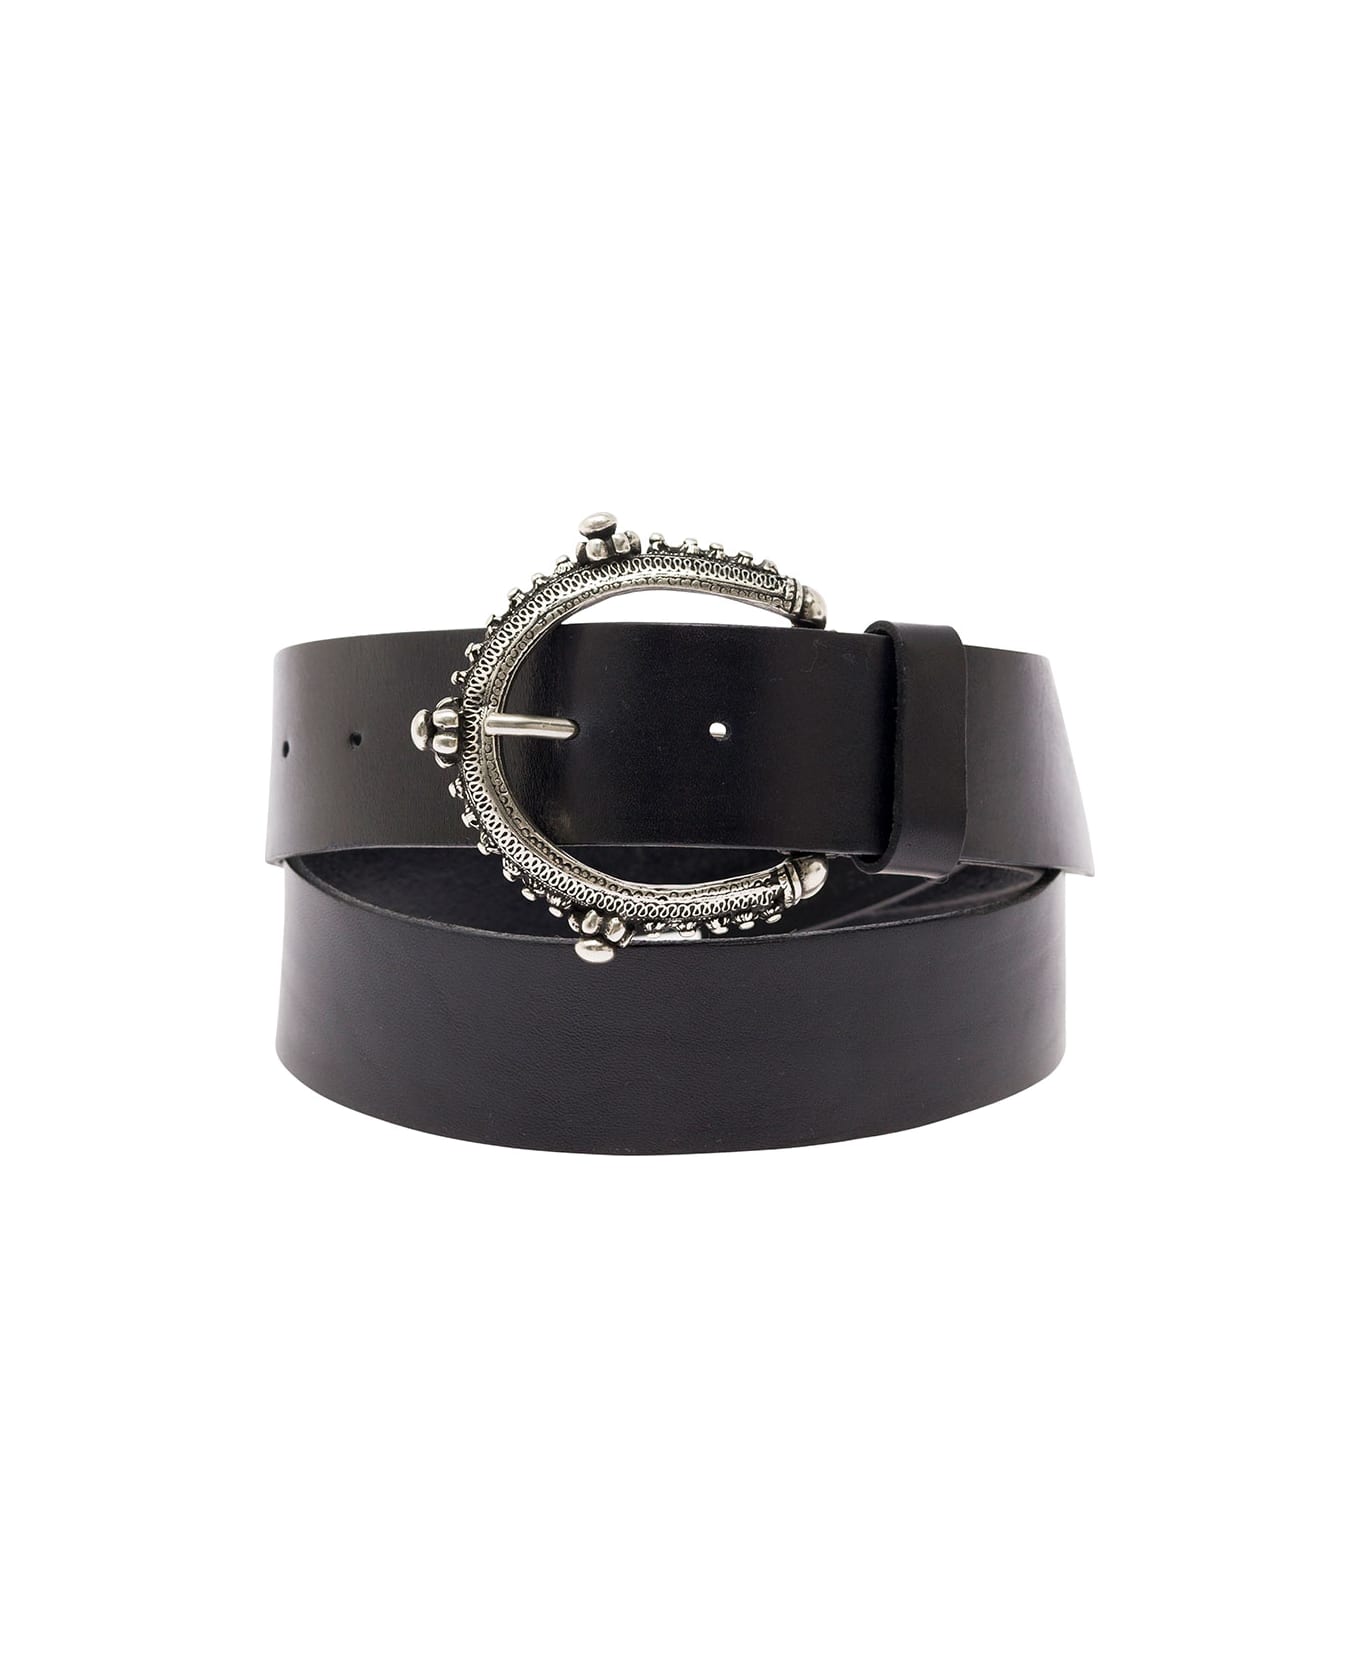 Parosh Black Belt With Circle Buckle In Leather Woman - Black